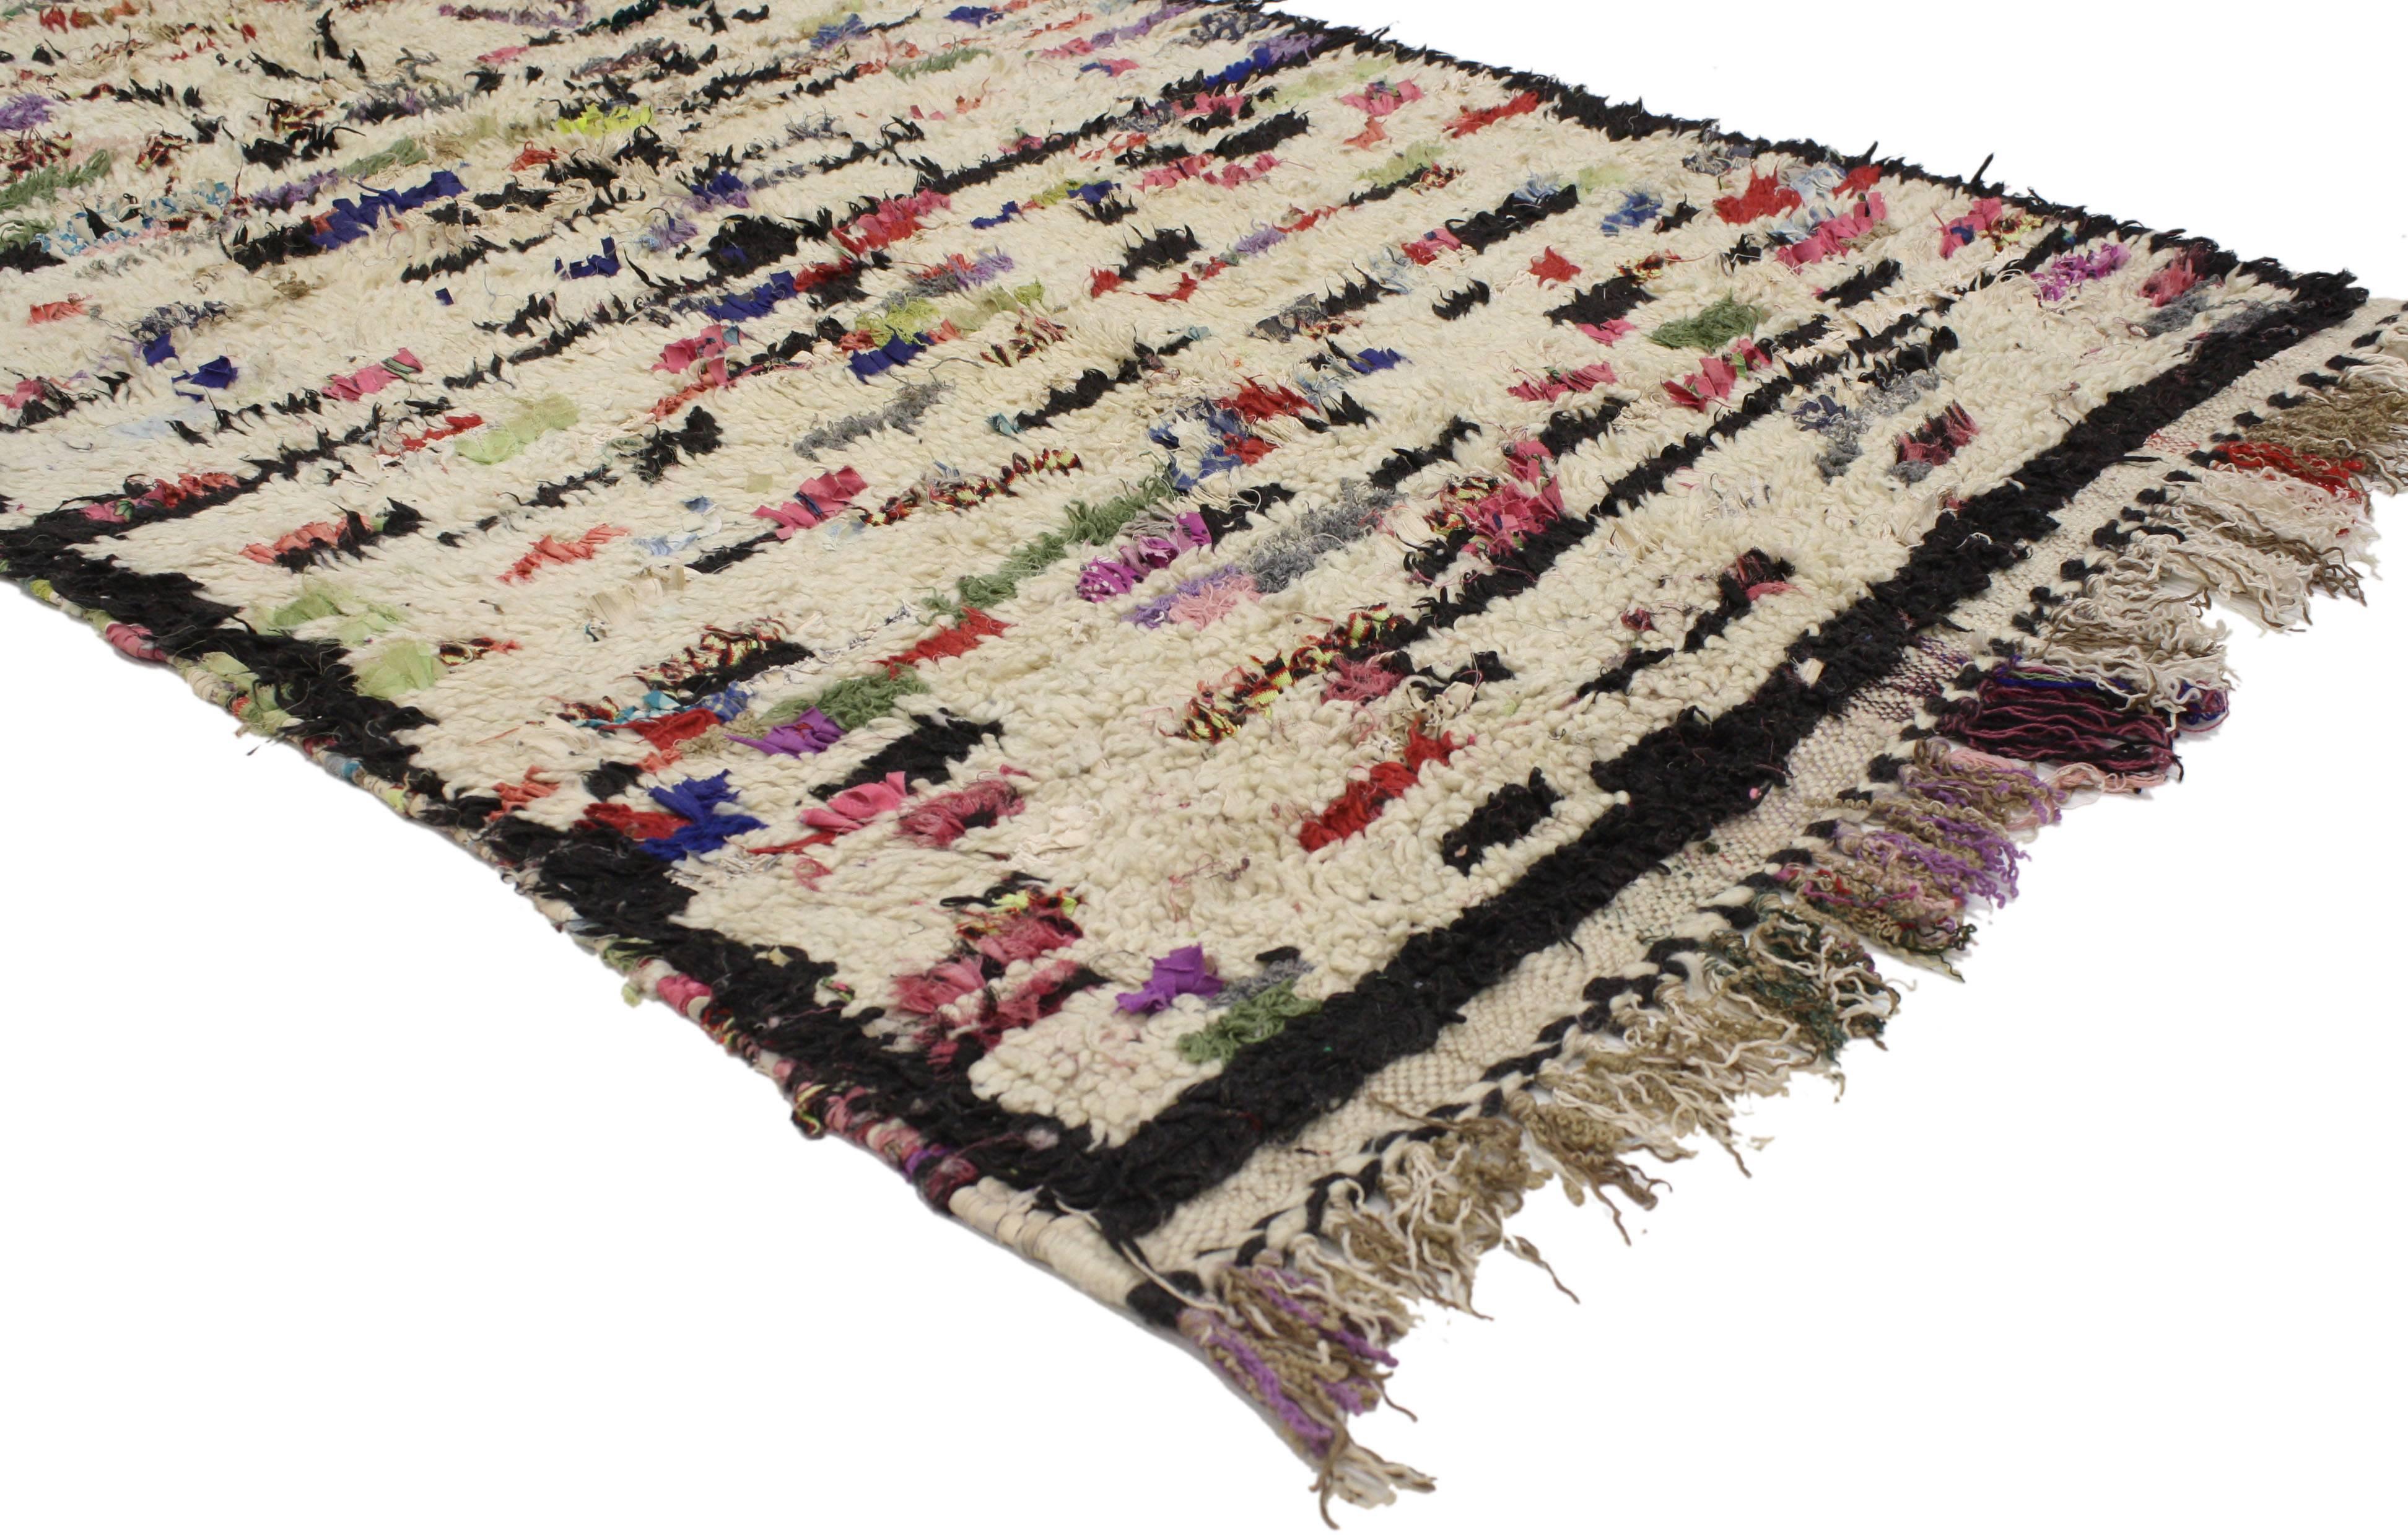 20625, Vintage Berber Moroccan Azilal Rug with Abstract Expressionist Post-Modern Style. Lacking a written language, Berber tribe weavers incorporated ancestral myths into their textiles using symbols and archaic images. This vintage Berber Moroccan